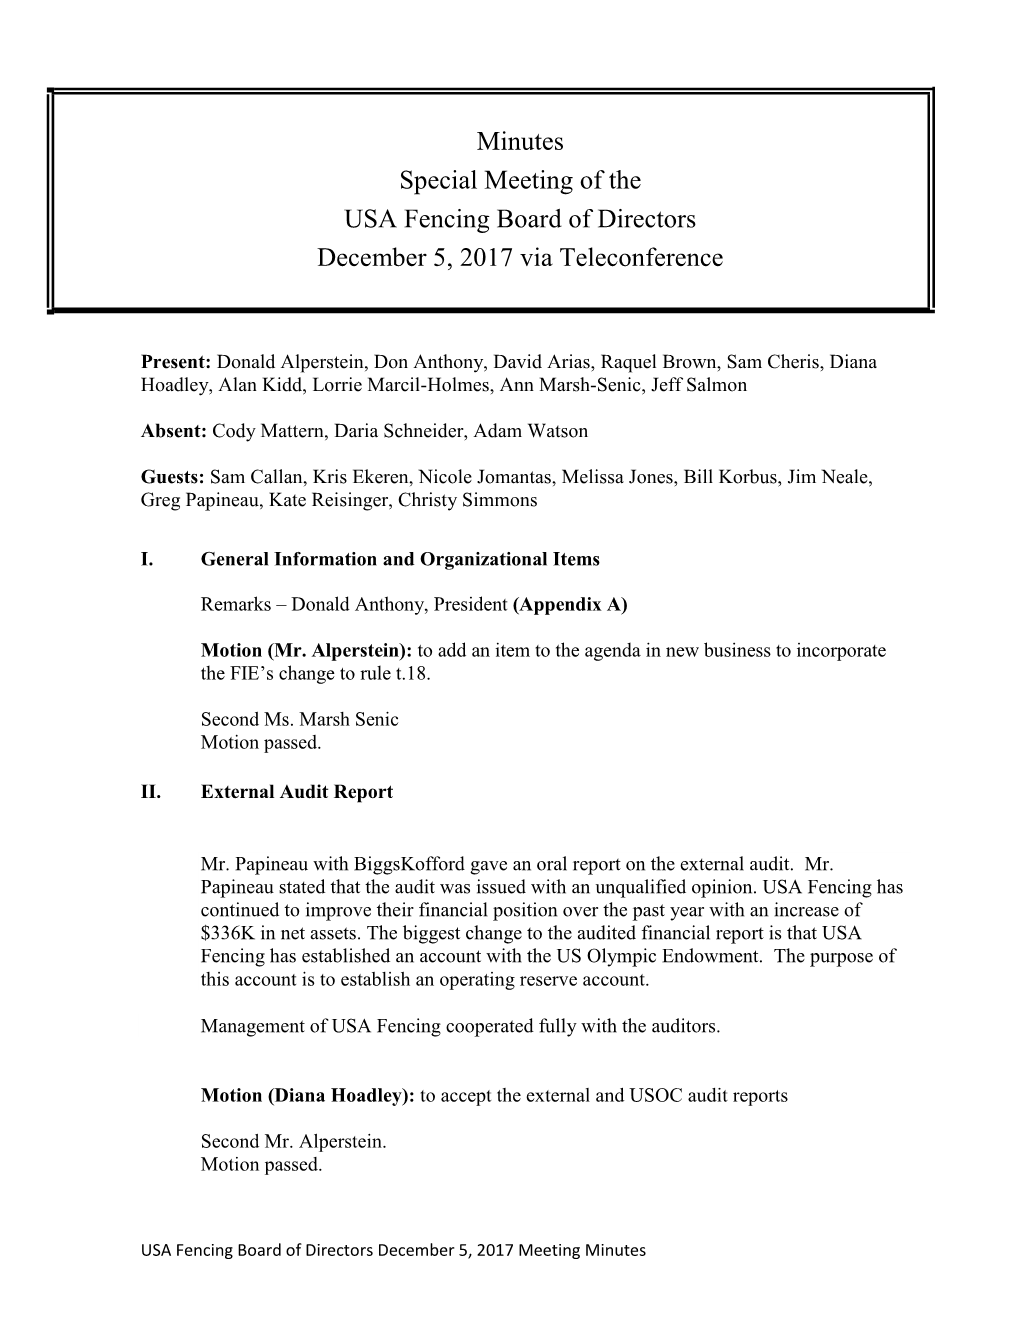 Minutes Special Meeting of the USA Fencing Board of Directors December 5, 2017 Via Teleconference